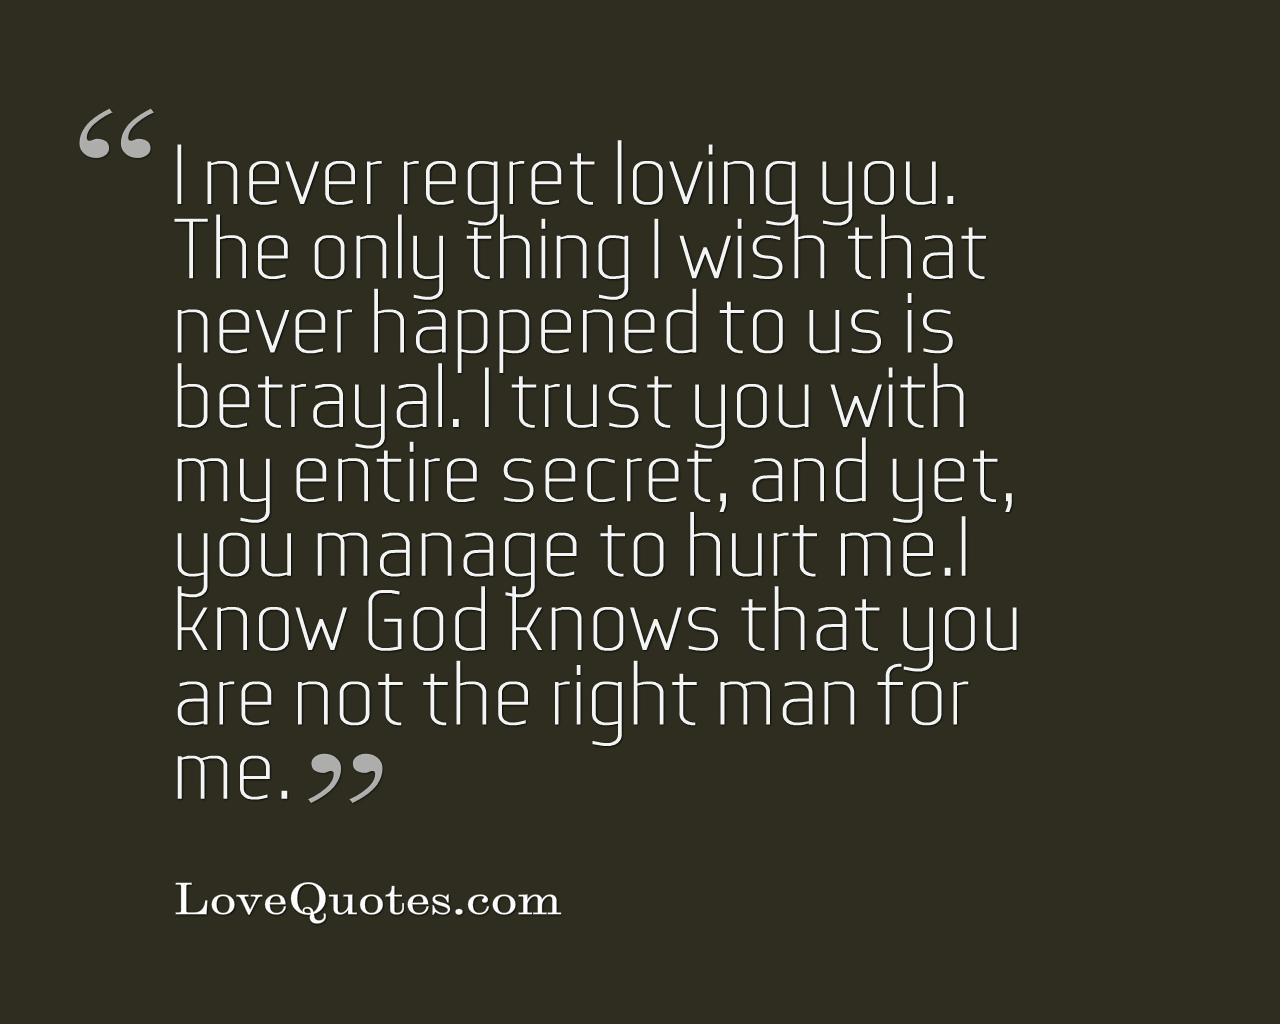 I Never Regret Loving You - Love Quotes